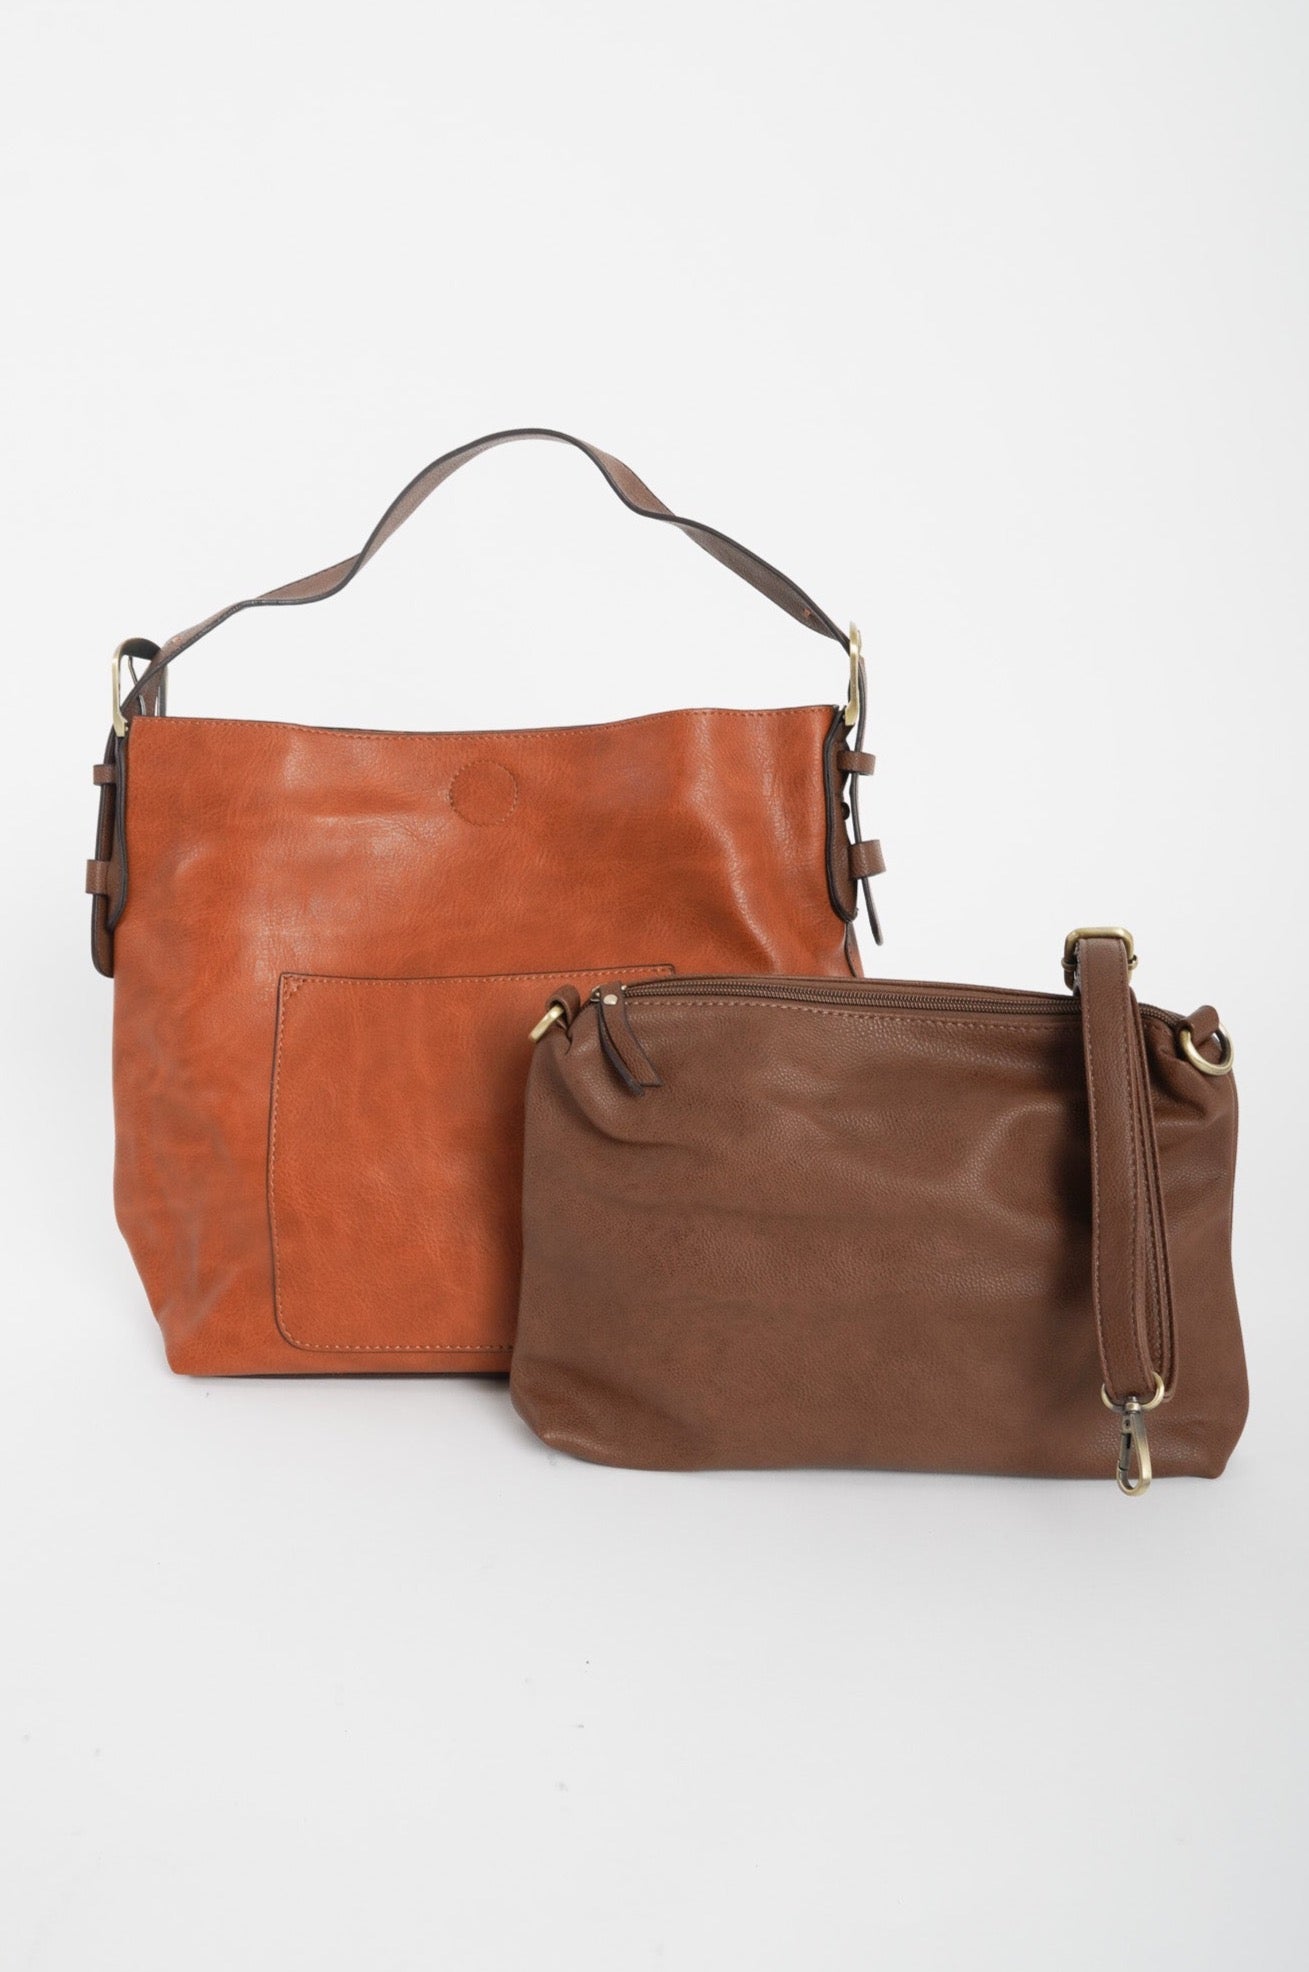 A two toned, brown hobo bag with a miniature dark brown crossbody included. 